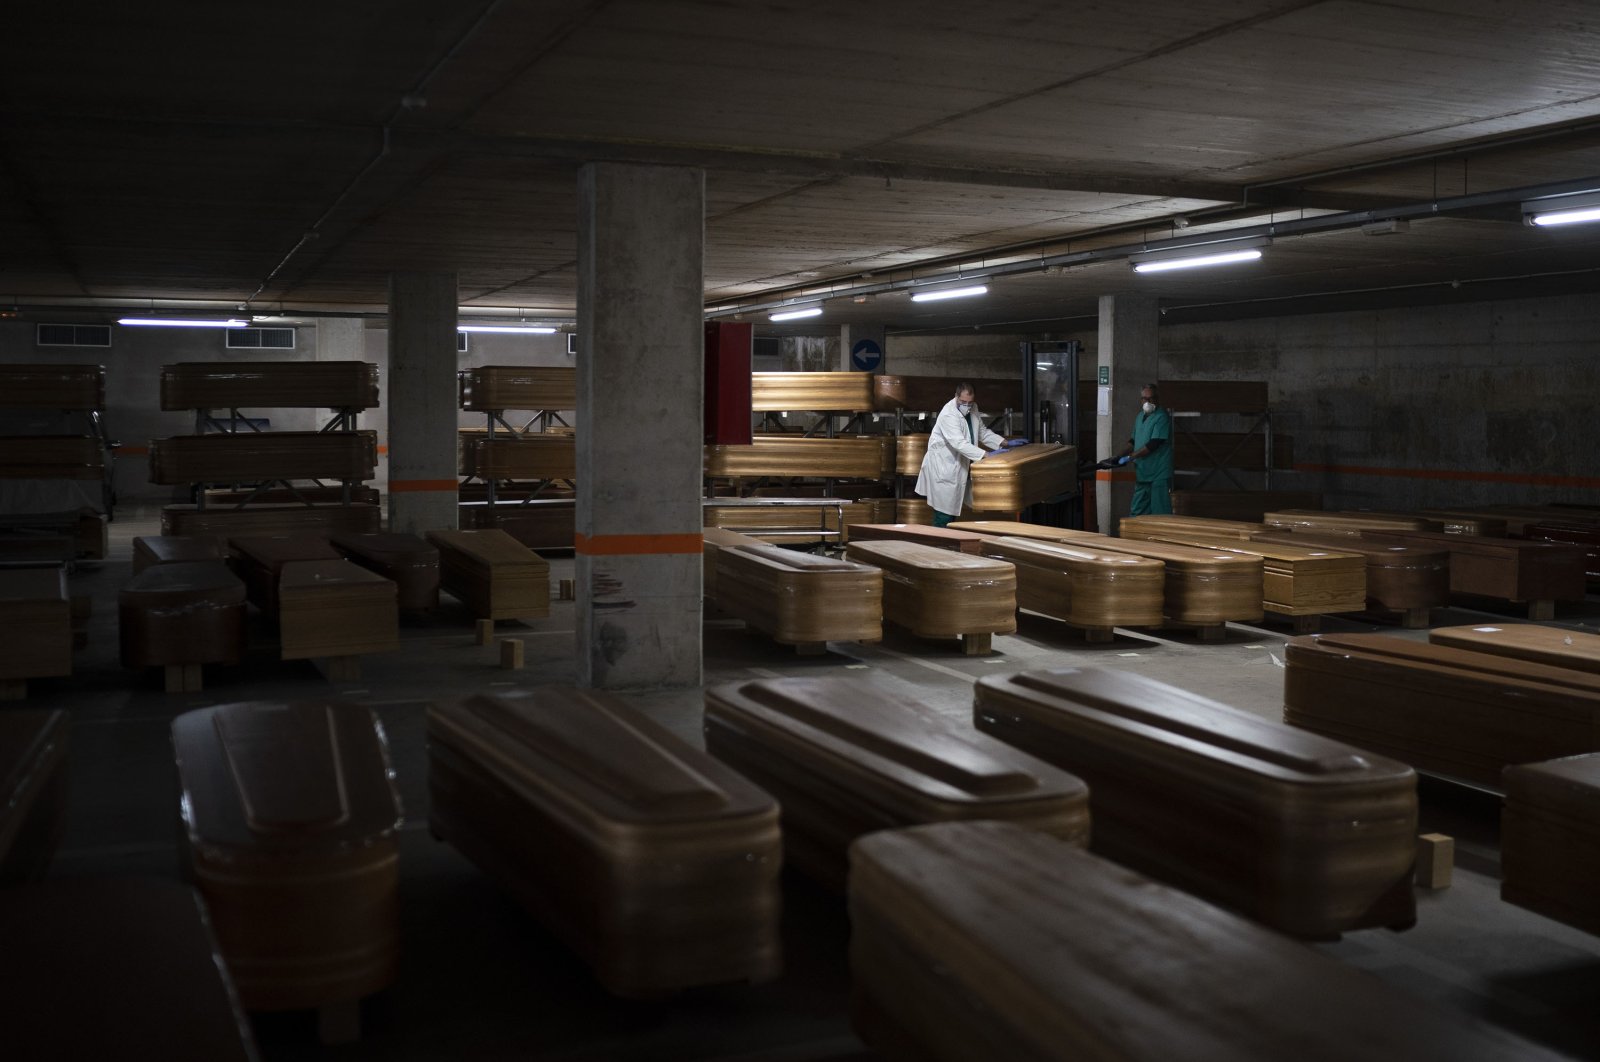 Coffins carrying the bodies of people who died of coronavirus and are waiting to be buried or incinerated in an underground parking lot at the Collserola funeral home in Barcelona, Spain, April 2, 2020. (AP Photo)